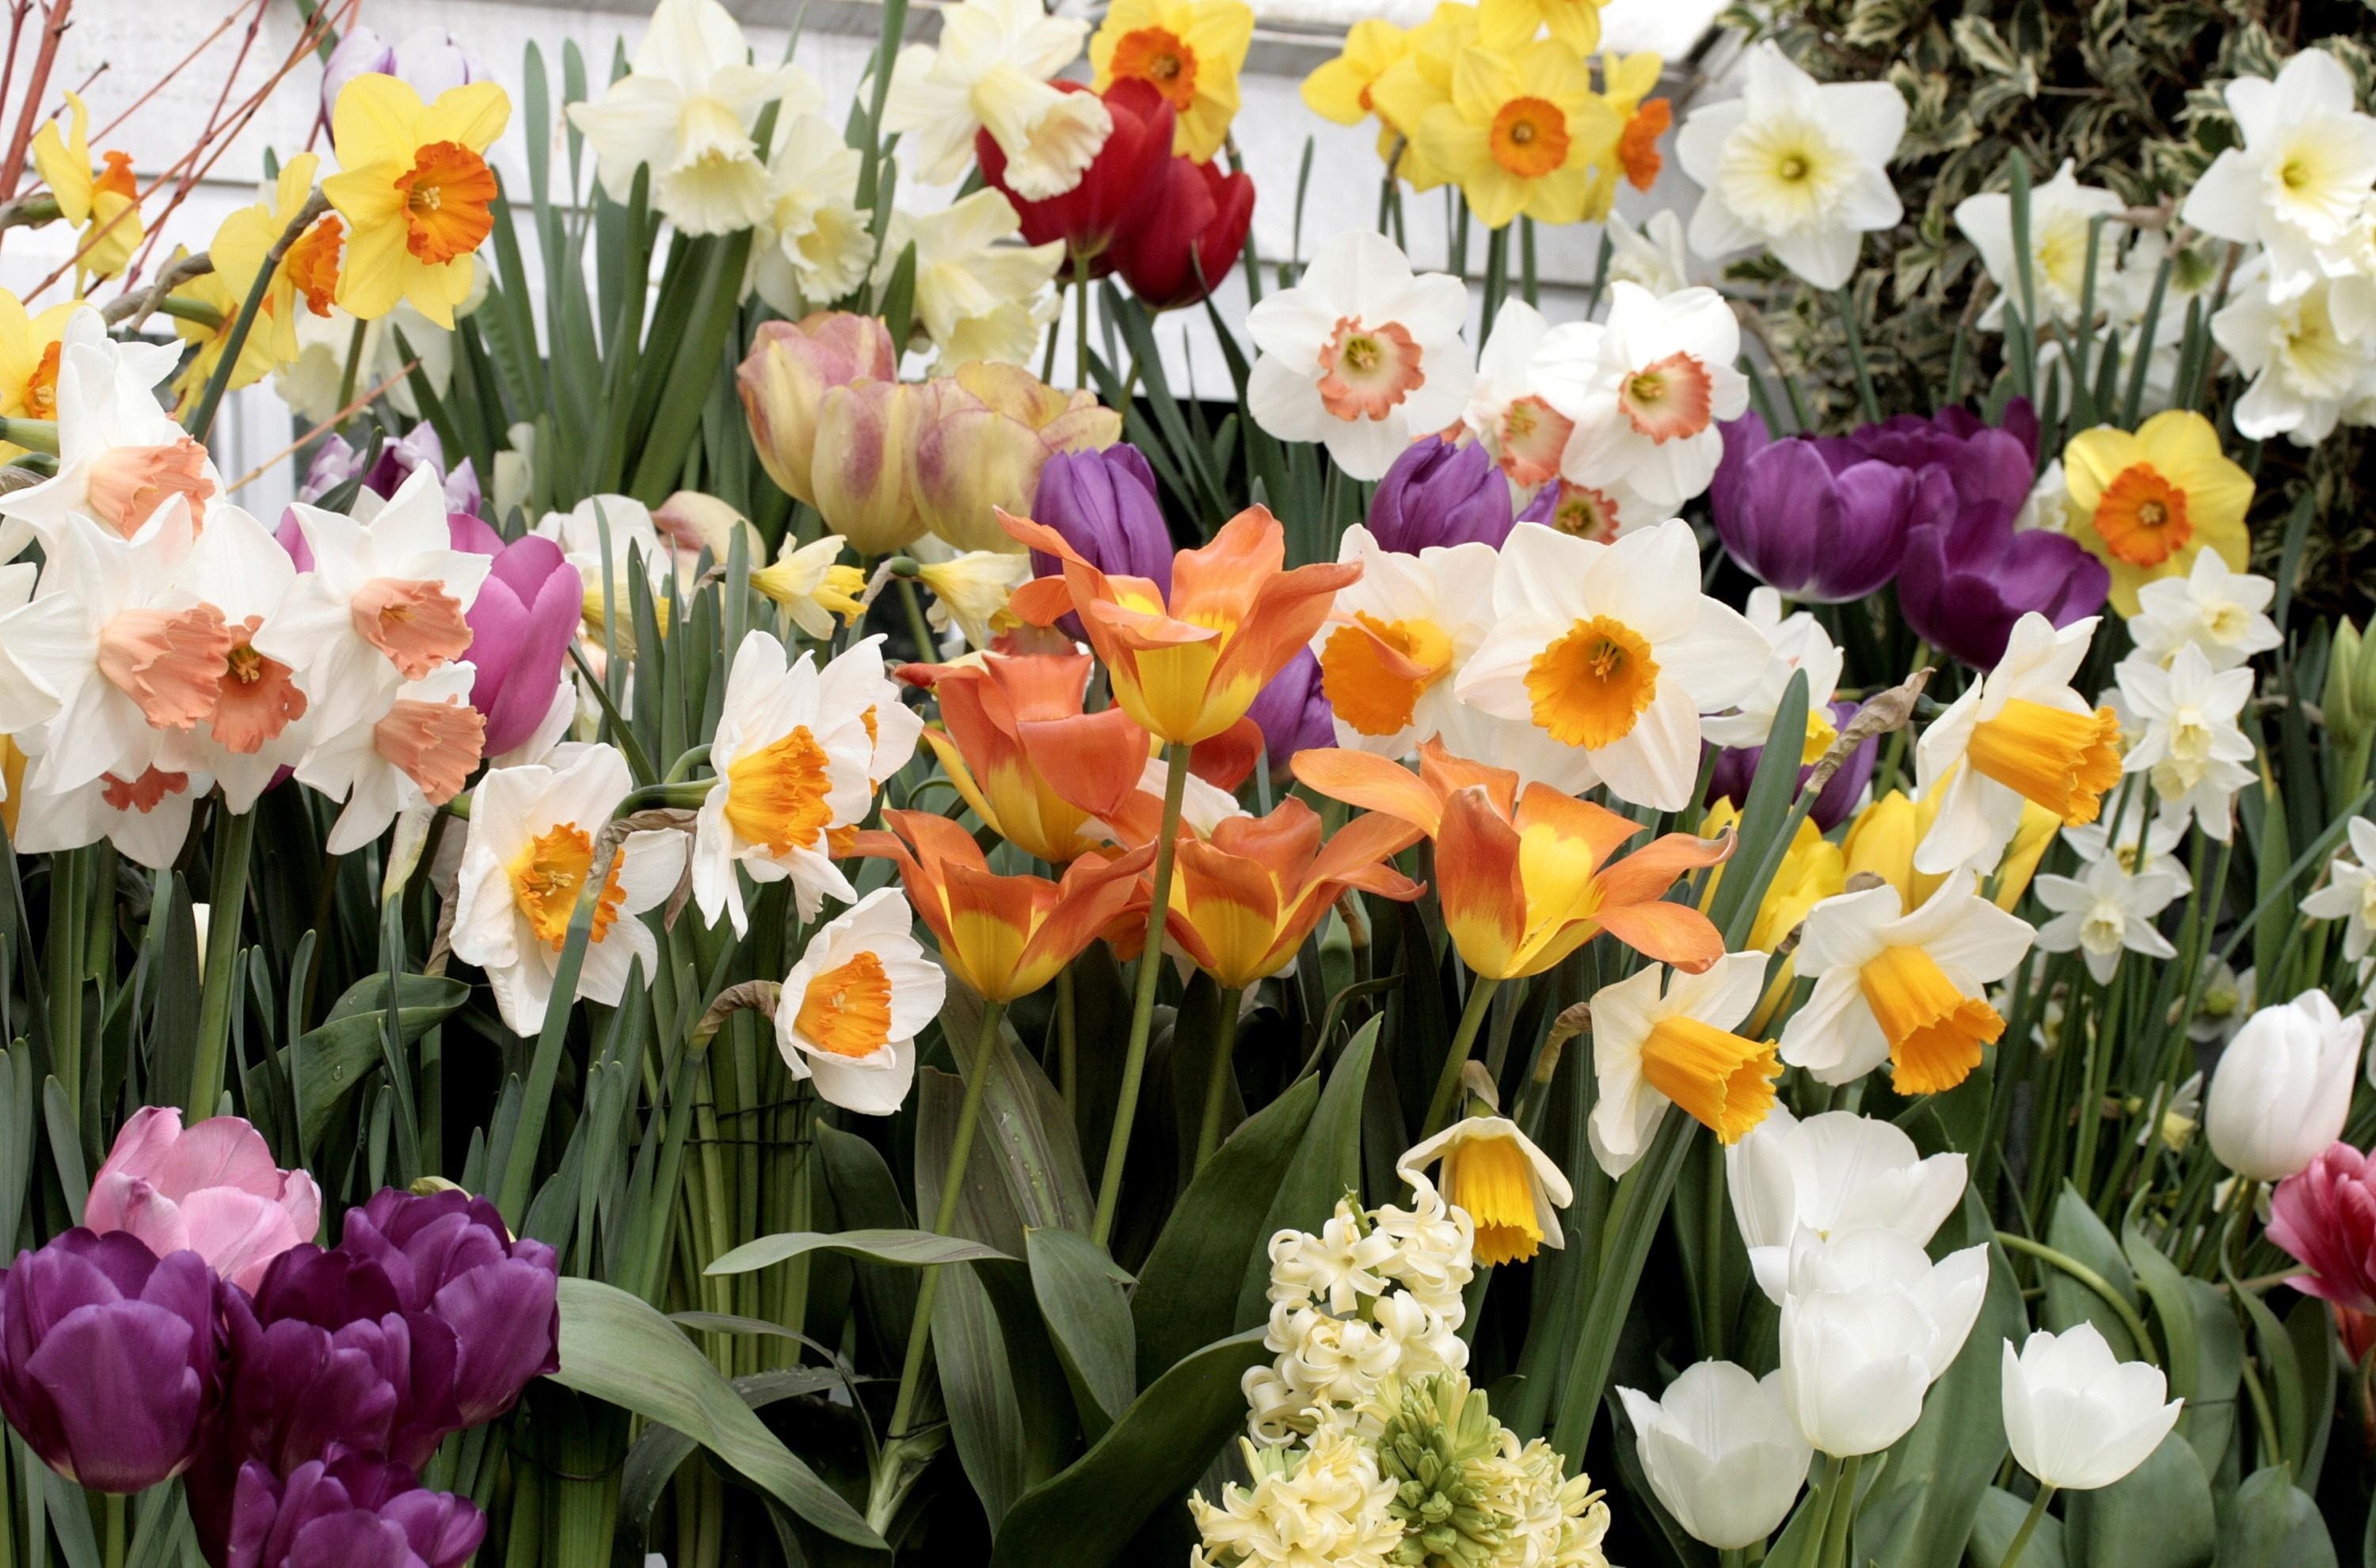 flowers, tulips, narcissussi, hyacinth, flower bed, flowerbed, lots of, multitude UHD